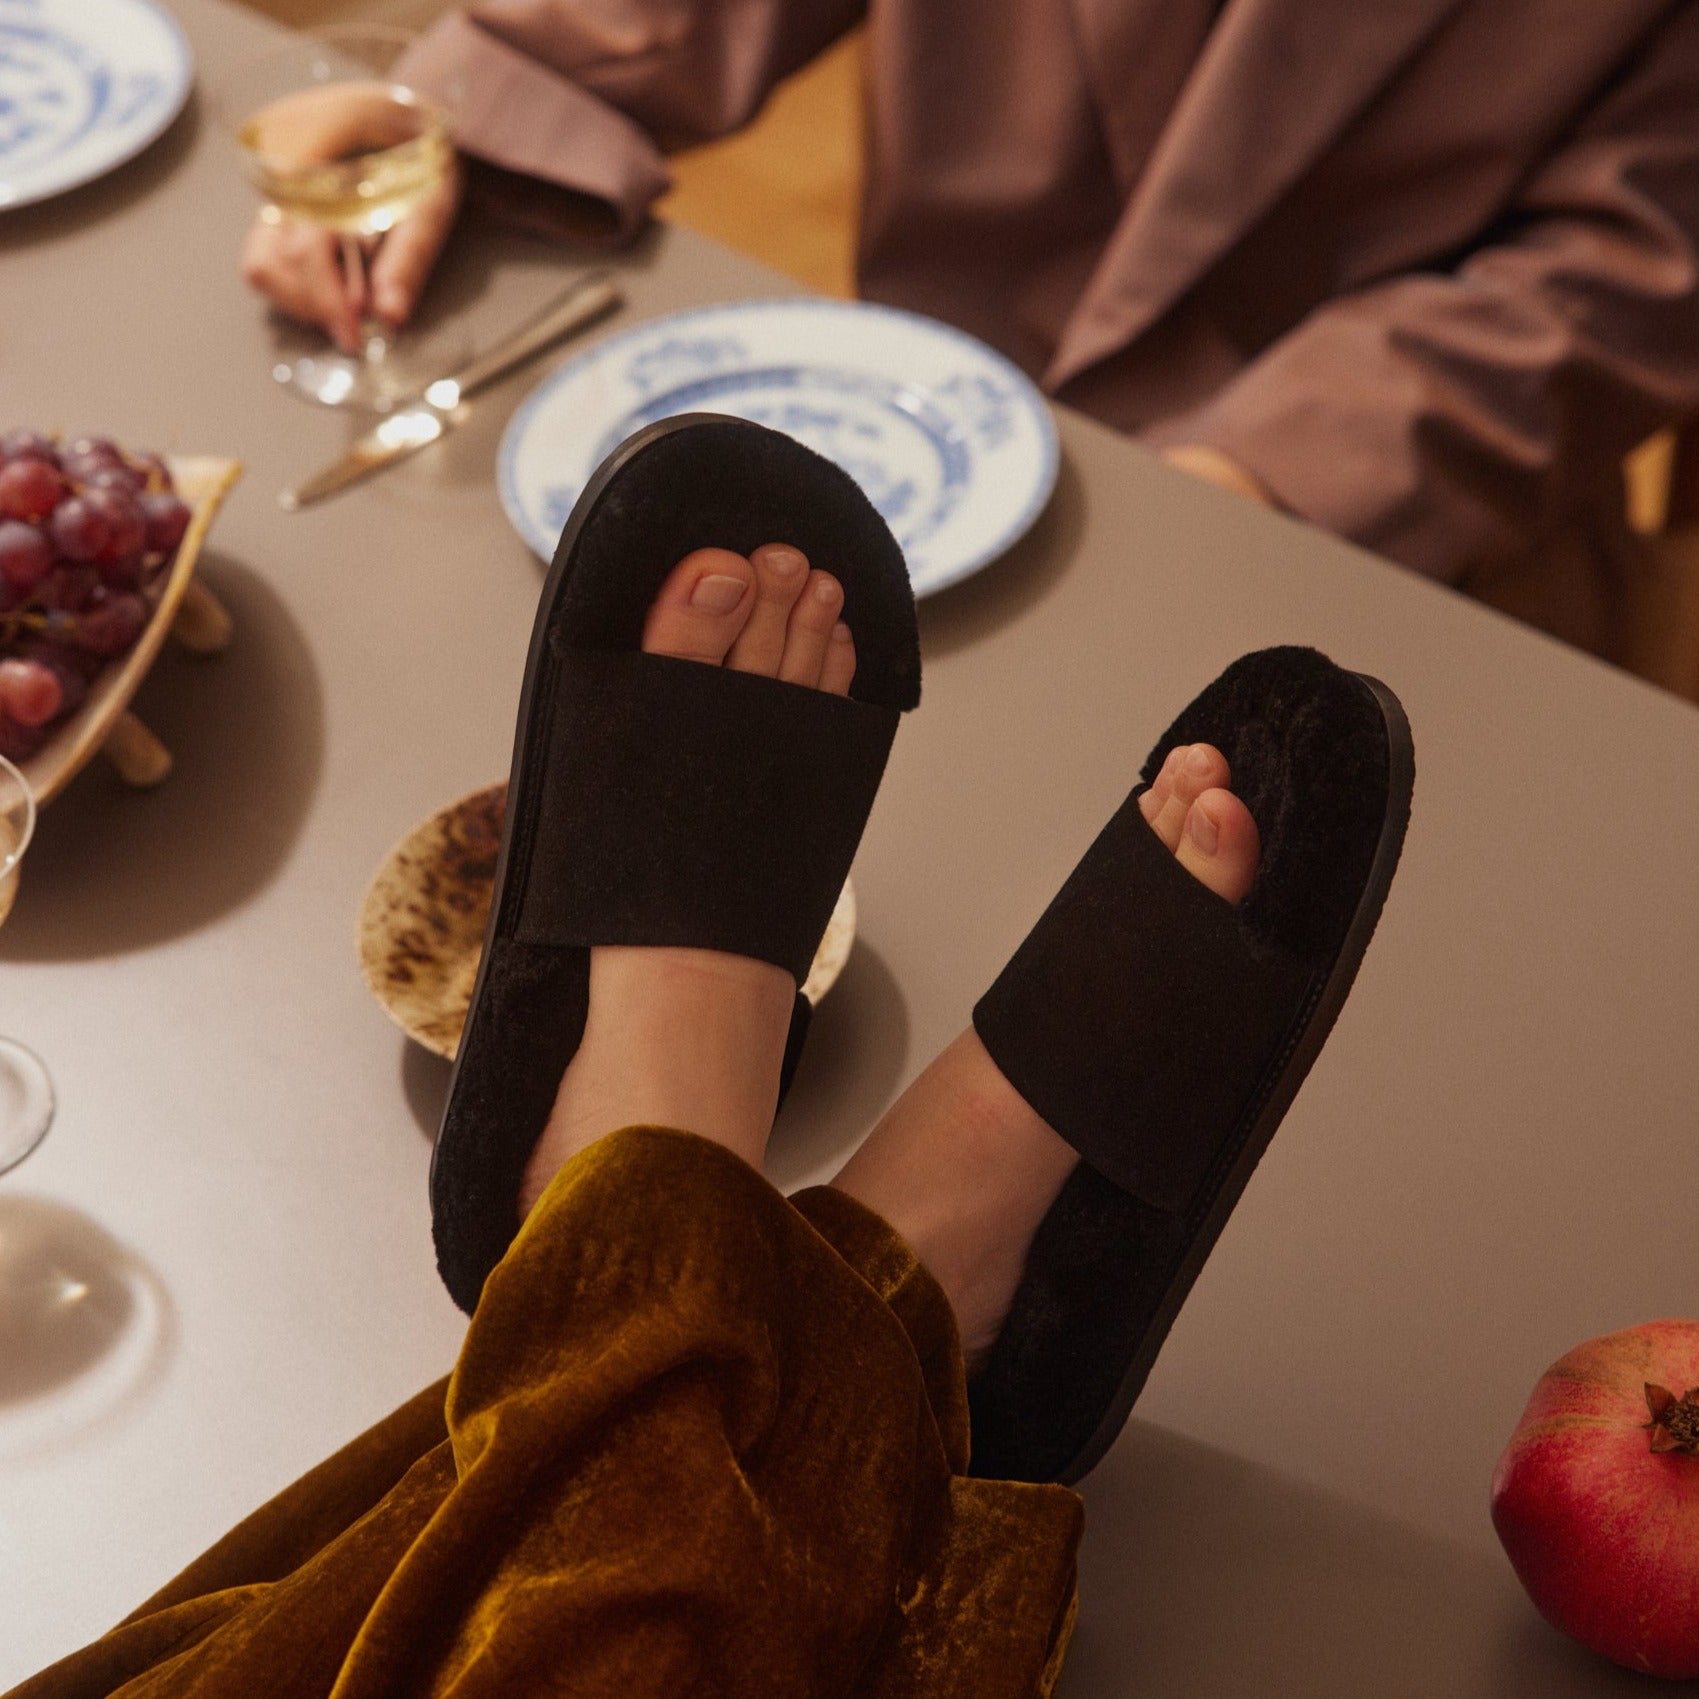 Inabo Women's Slipper in Black suede and shearling with an open-toe worn by a women sitting with her feet up on a laid table